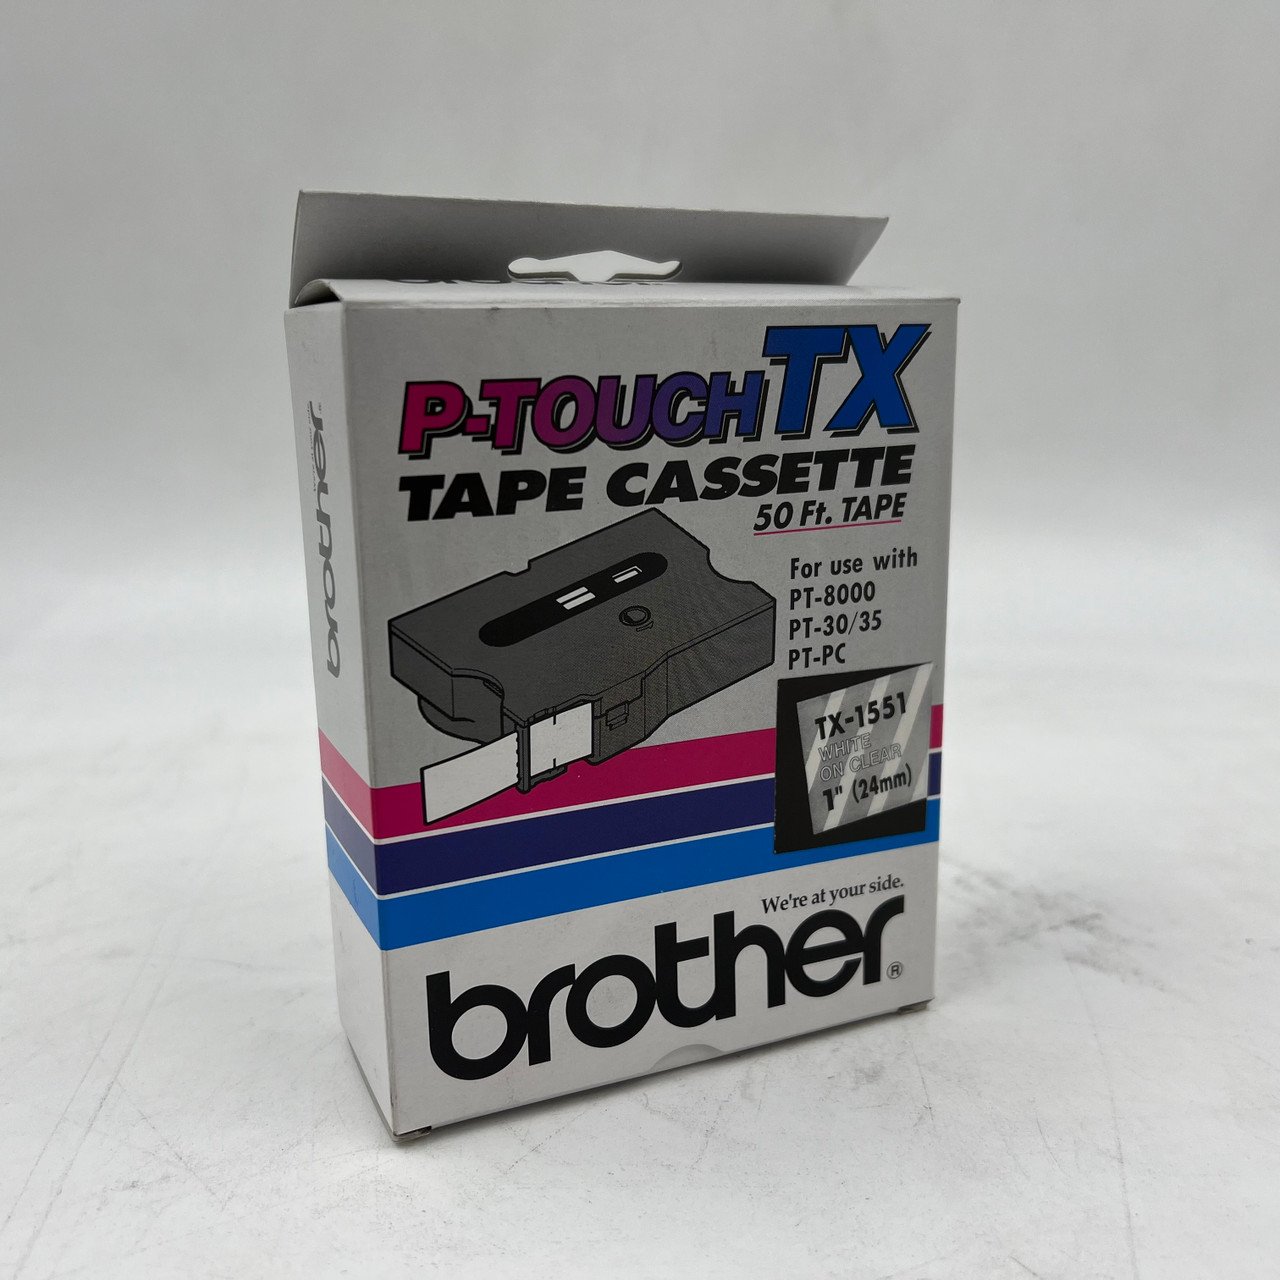 BROTHER TX-1551 P-TOUCH TX TAPE CARTRIDGE FOR PT-8000, PT-30/35 - NEW